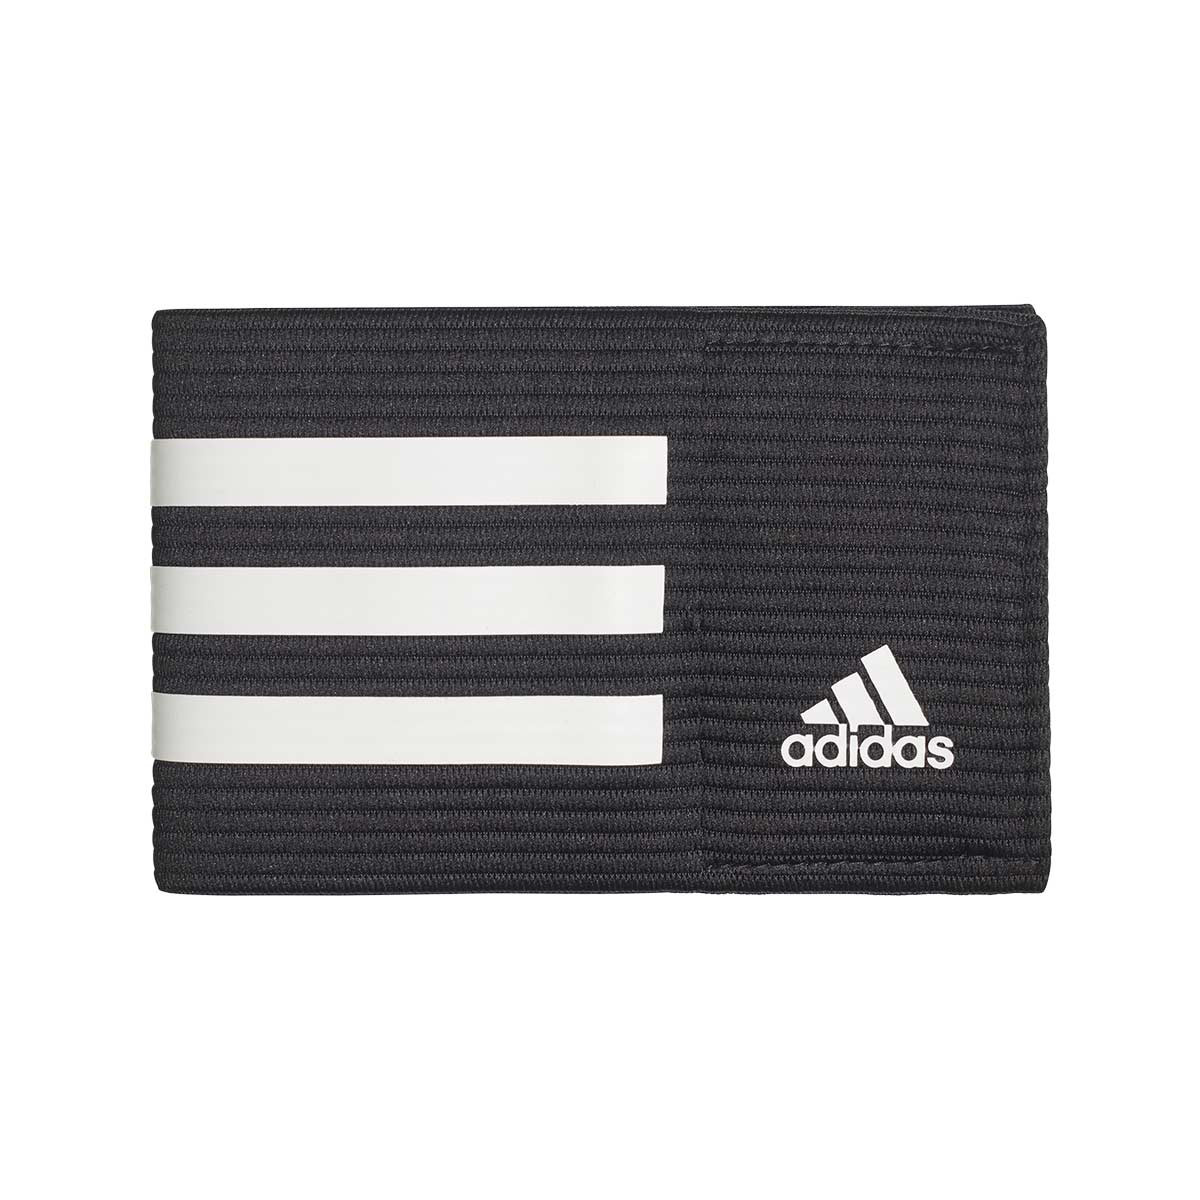 adidas wallet moscow